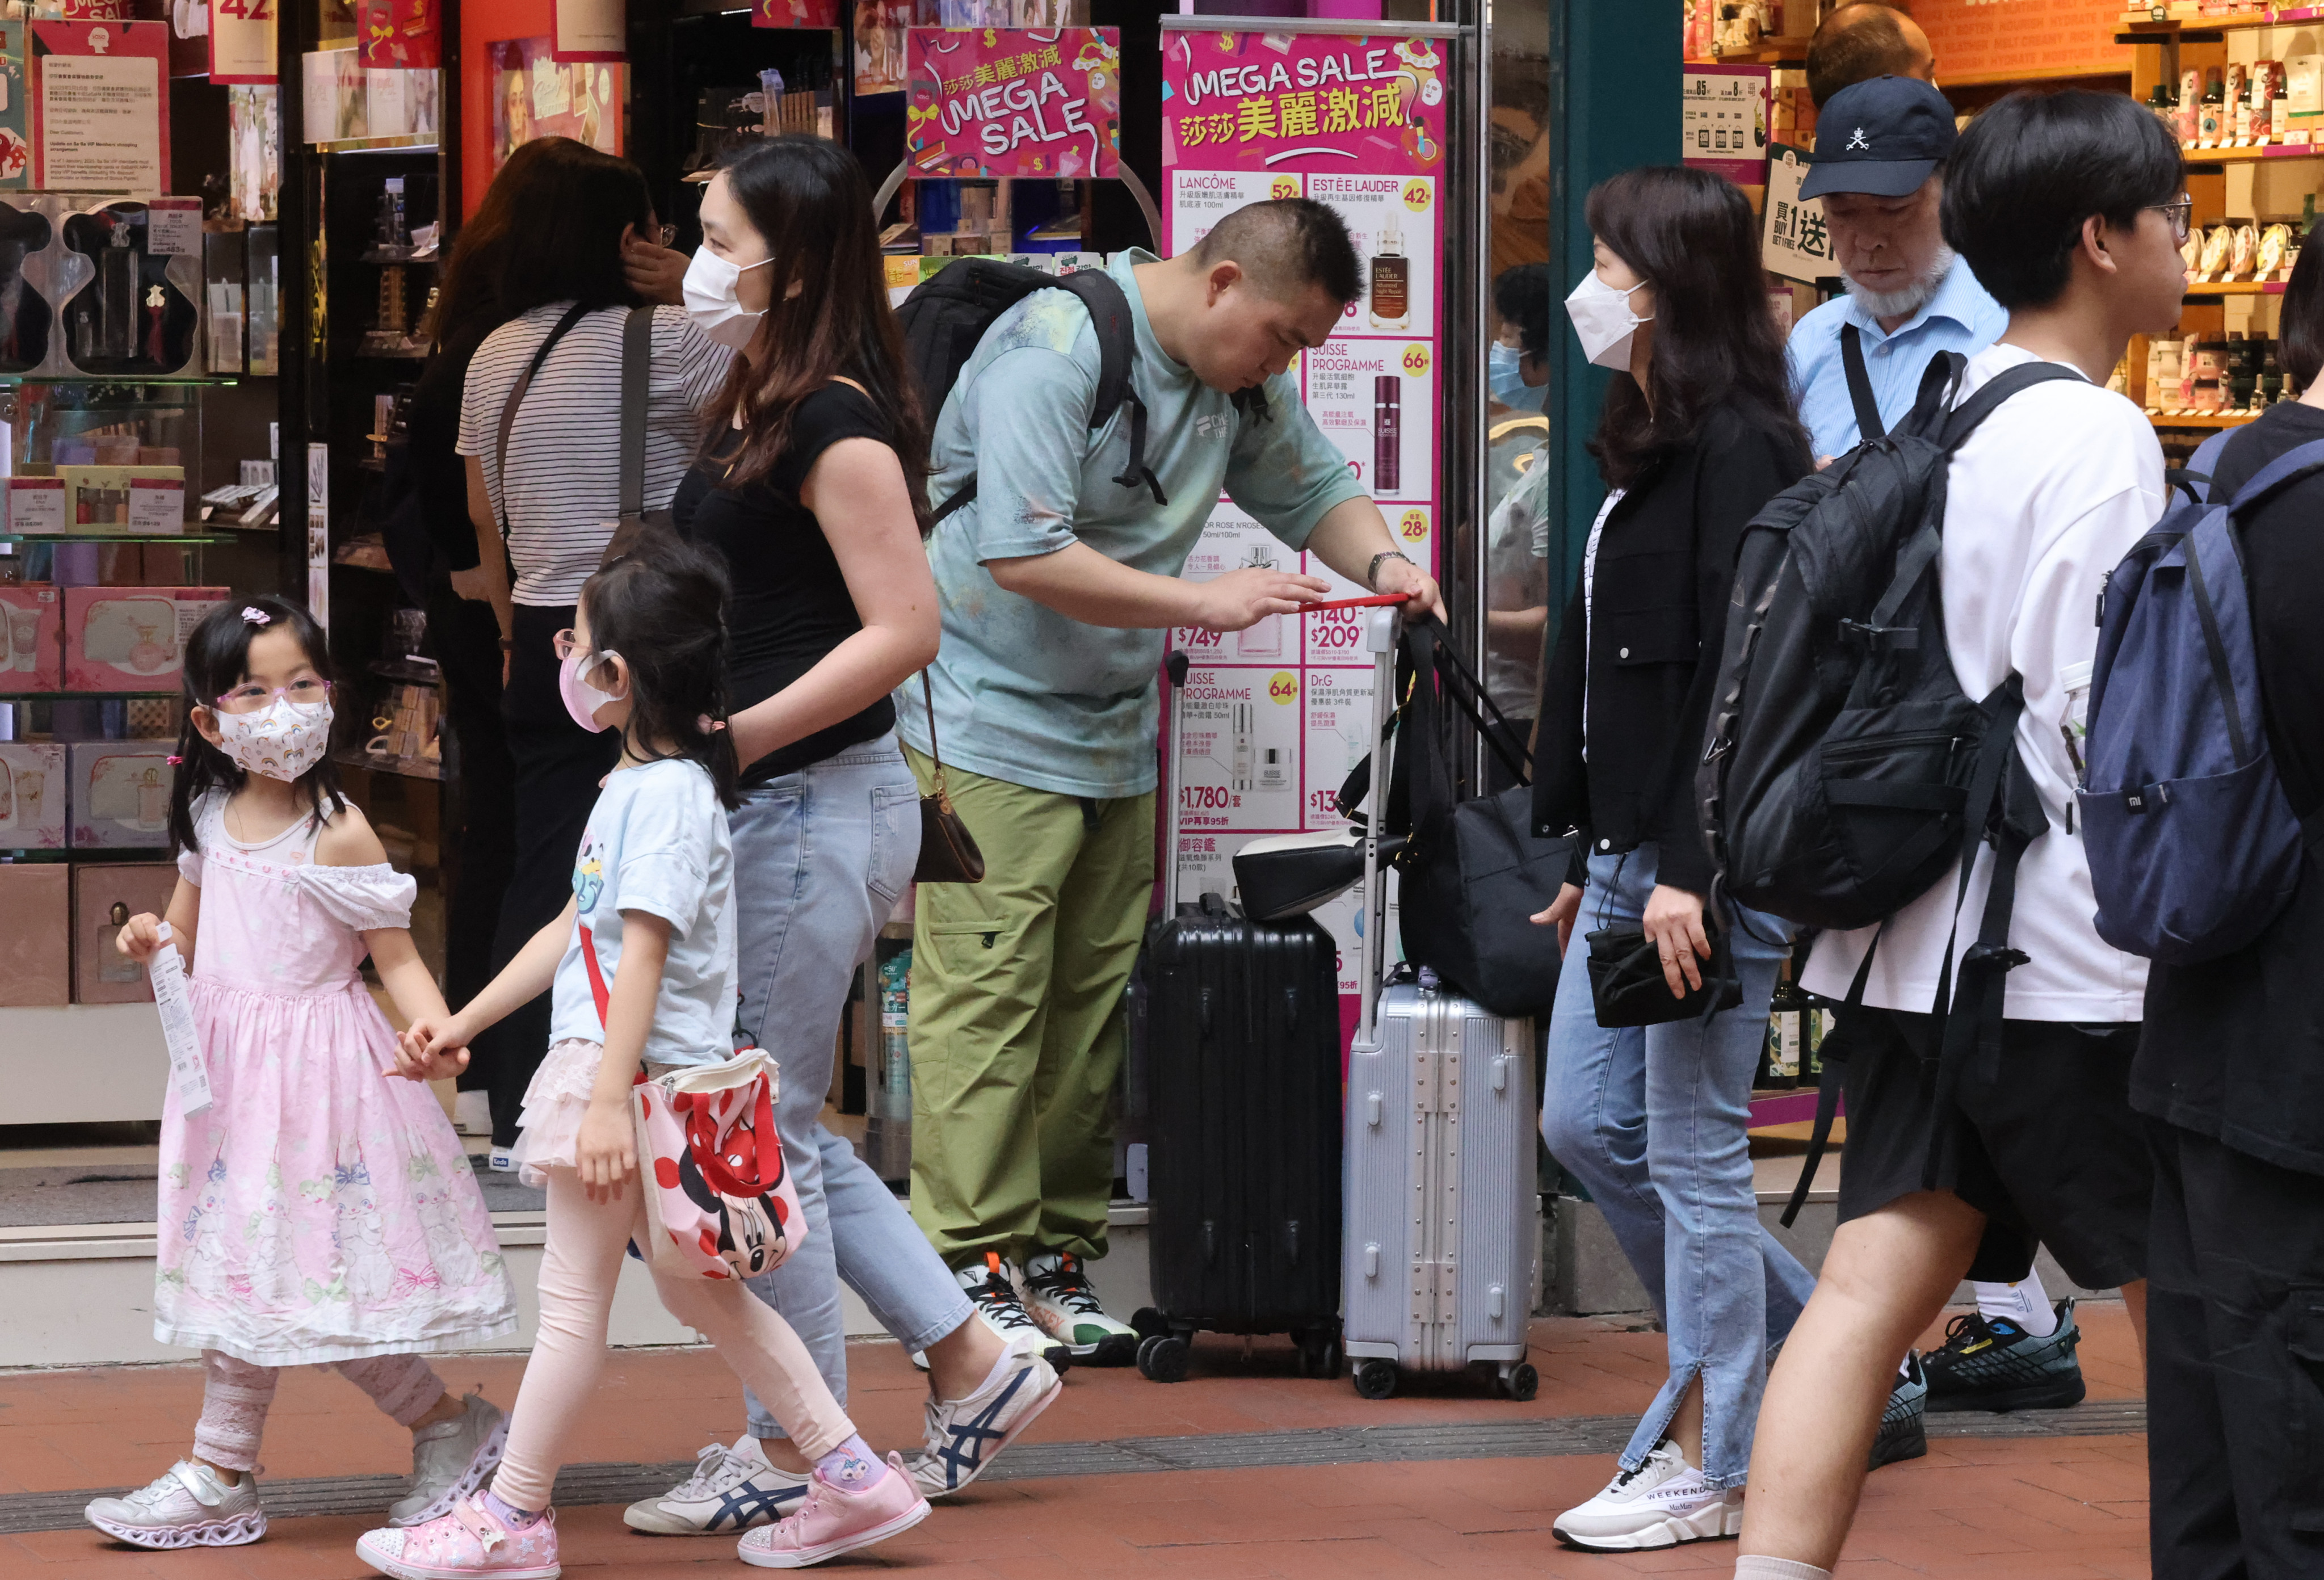 Hong Kong’s retail sales hit HK$33.6 billion in March, provisional figures from the Census and Statistics Department show. Photo: Jonathan Wong